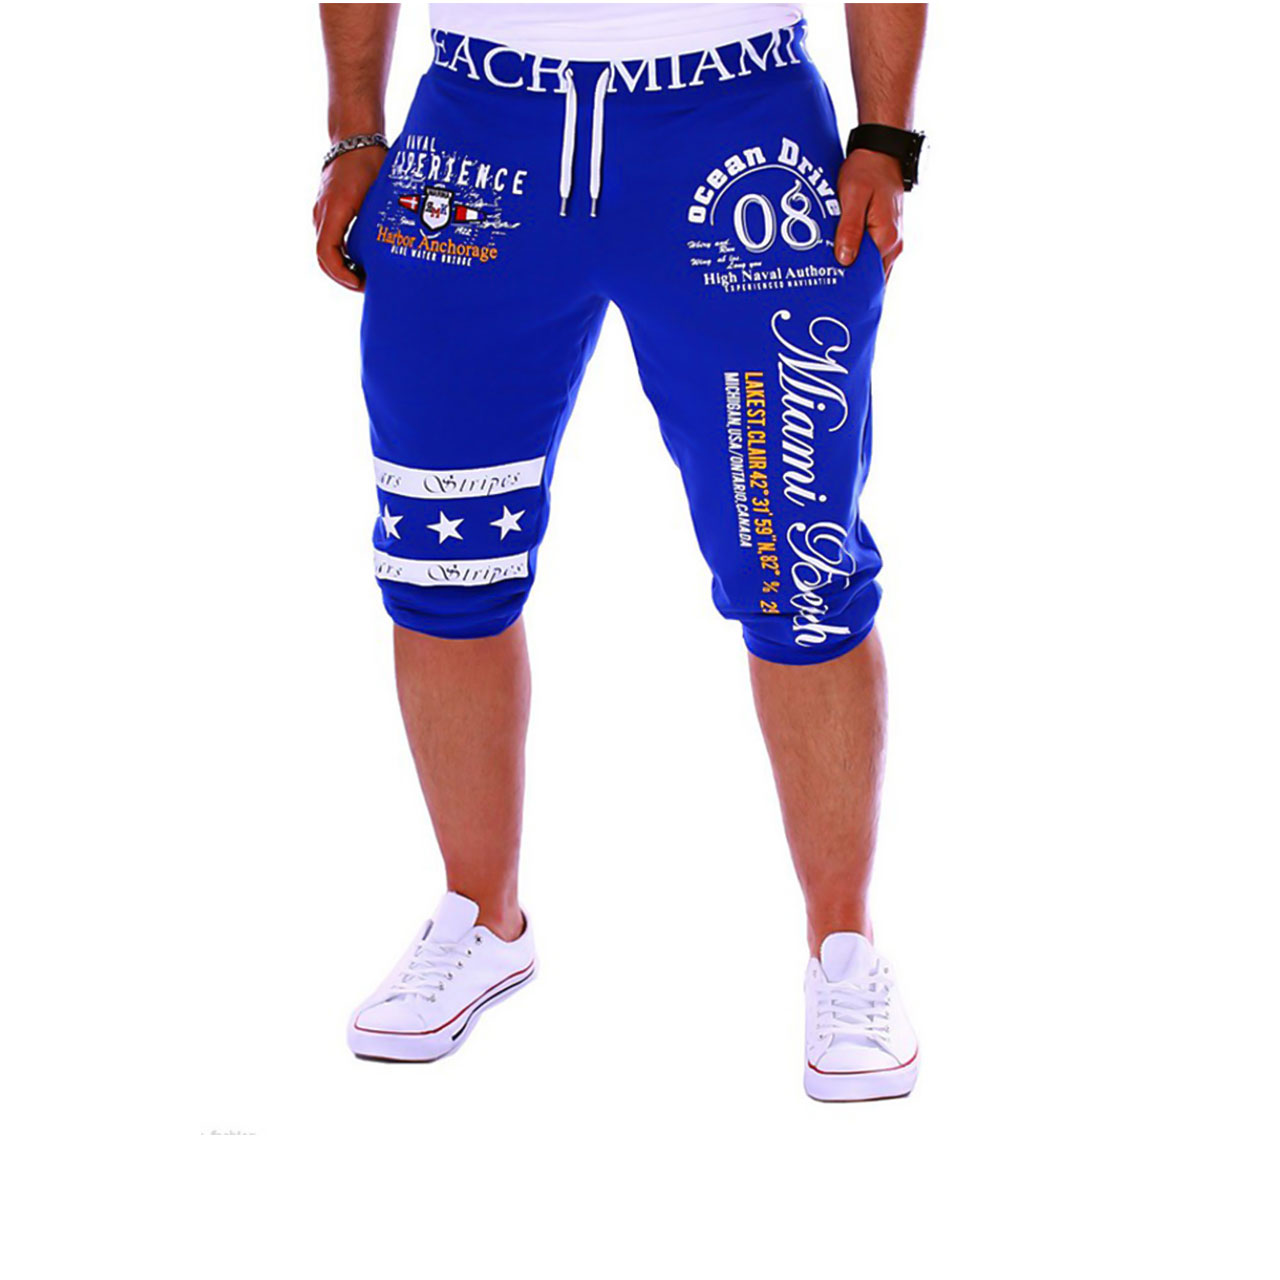 Basic Weekend Sports 3/4 Blue Active USA Mens Short Sweatpants With White  Letter Print, $35.95,